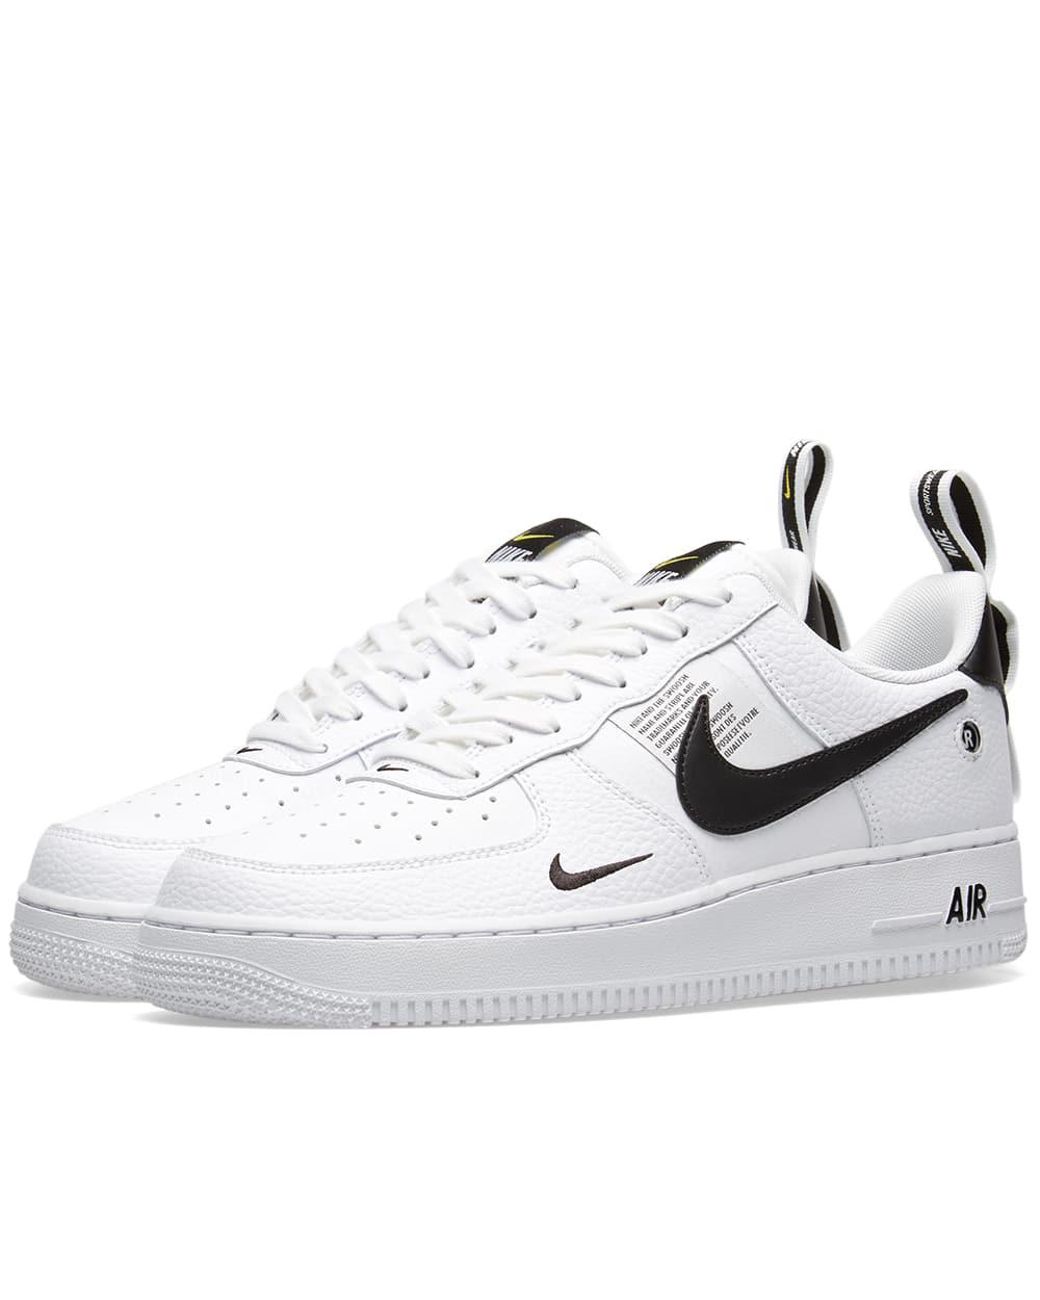 Nike AIR FORCE 1 LOW '07 LV8 UTILITY – DTLR